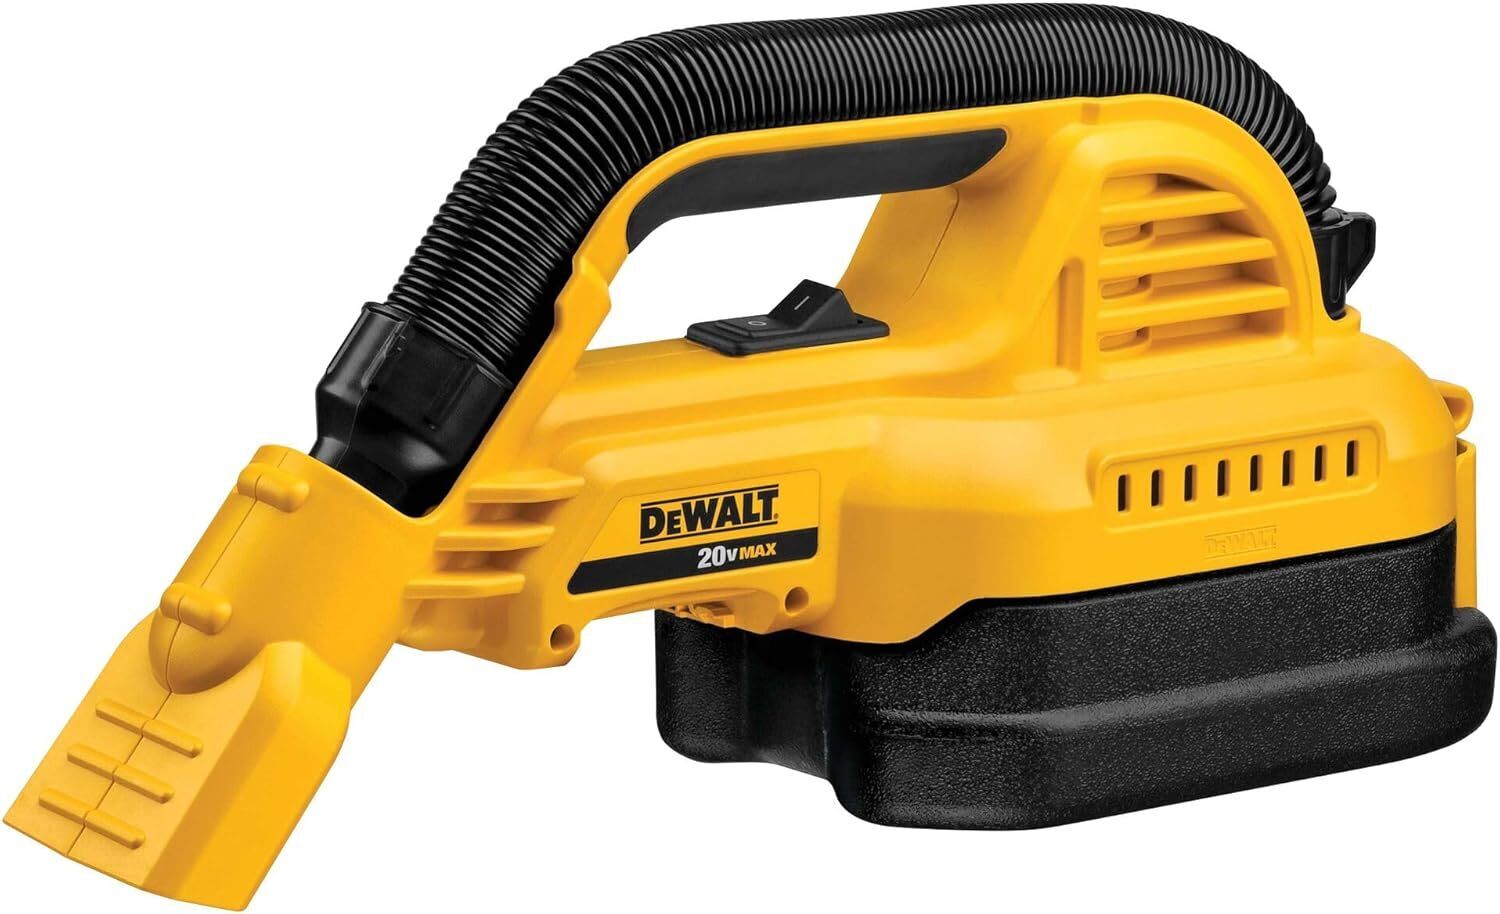 DEWALT 20V MAX Hand Vacuum, Cordless, for Wet or Dry Surfaces, 1/2-Gallon Tank,